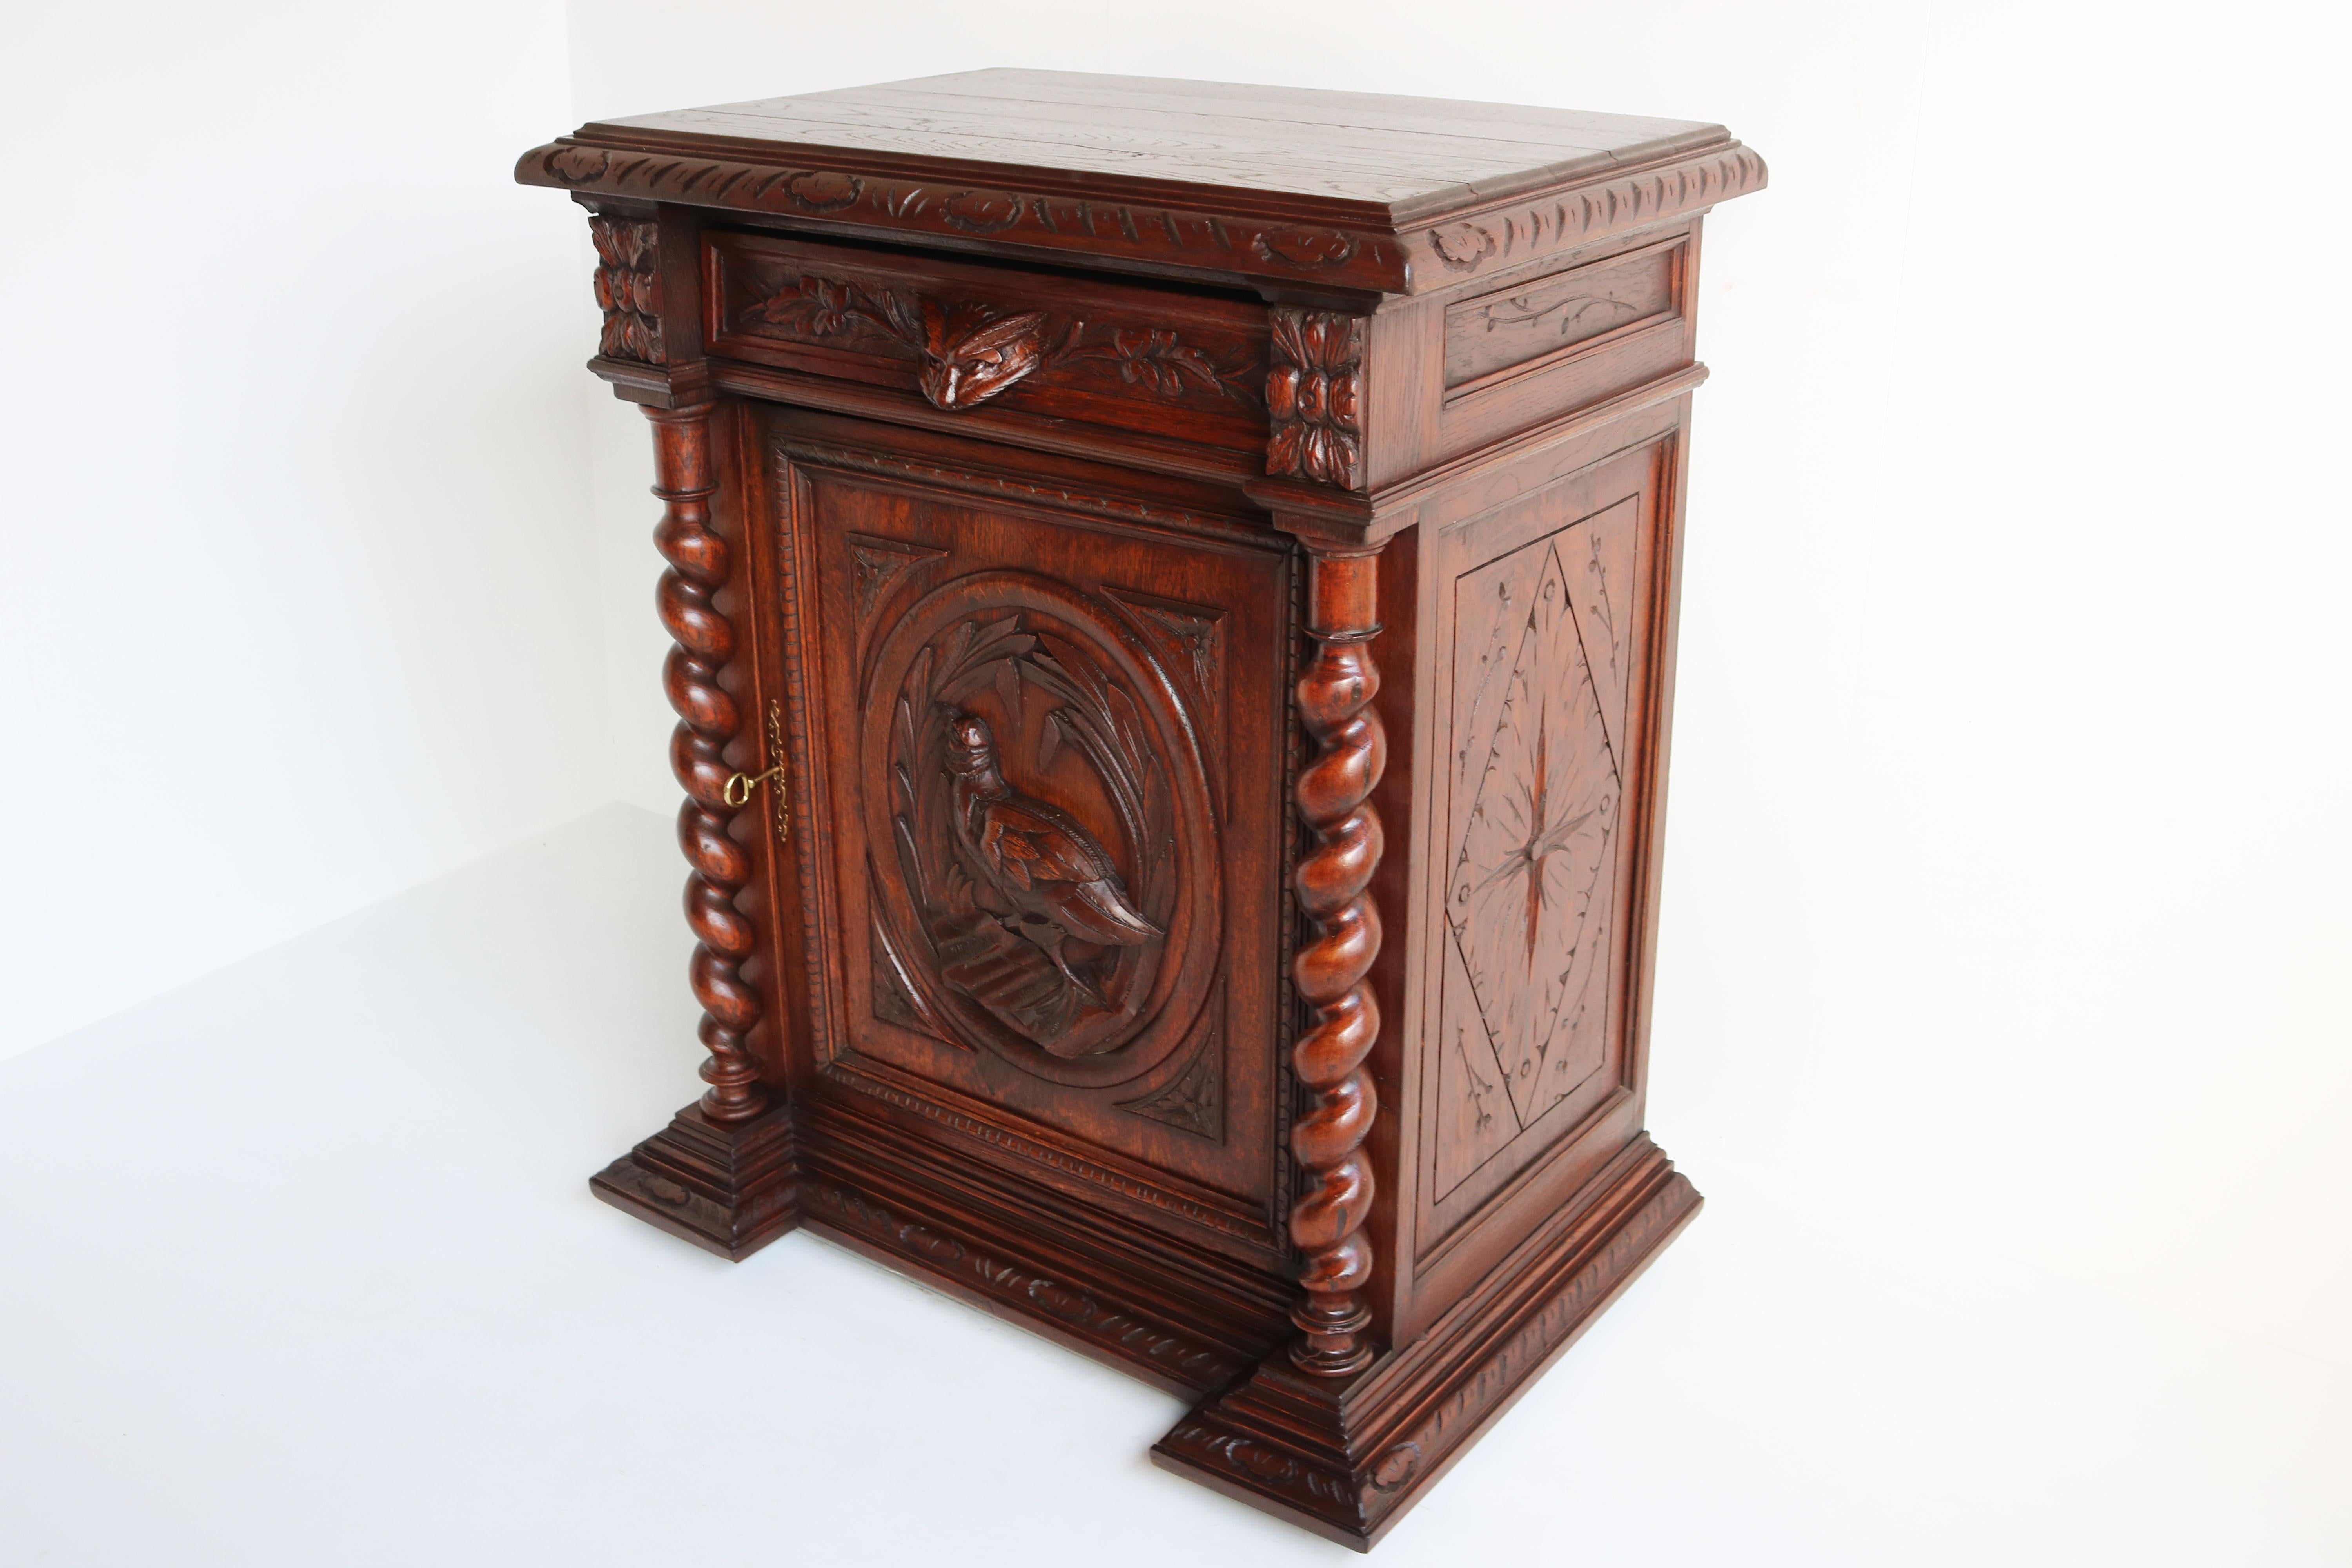 Marvelous 19th century antique French hunt / black forest style cabinet / confiturier. 
fully made from solid oak, rare model with four carved side panels. 
Carved by a master carver with much attention to detail. The handle of the drawer is a fox